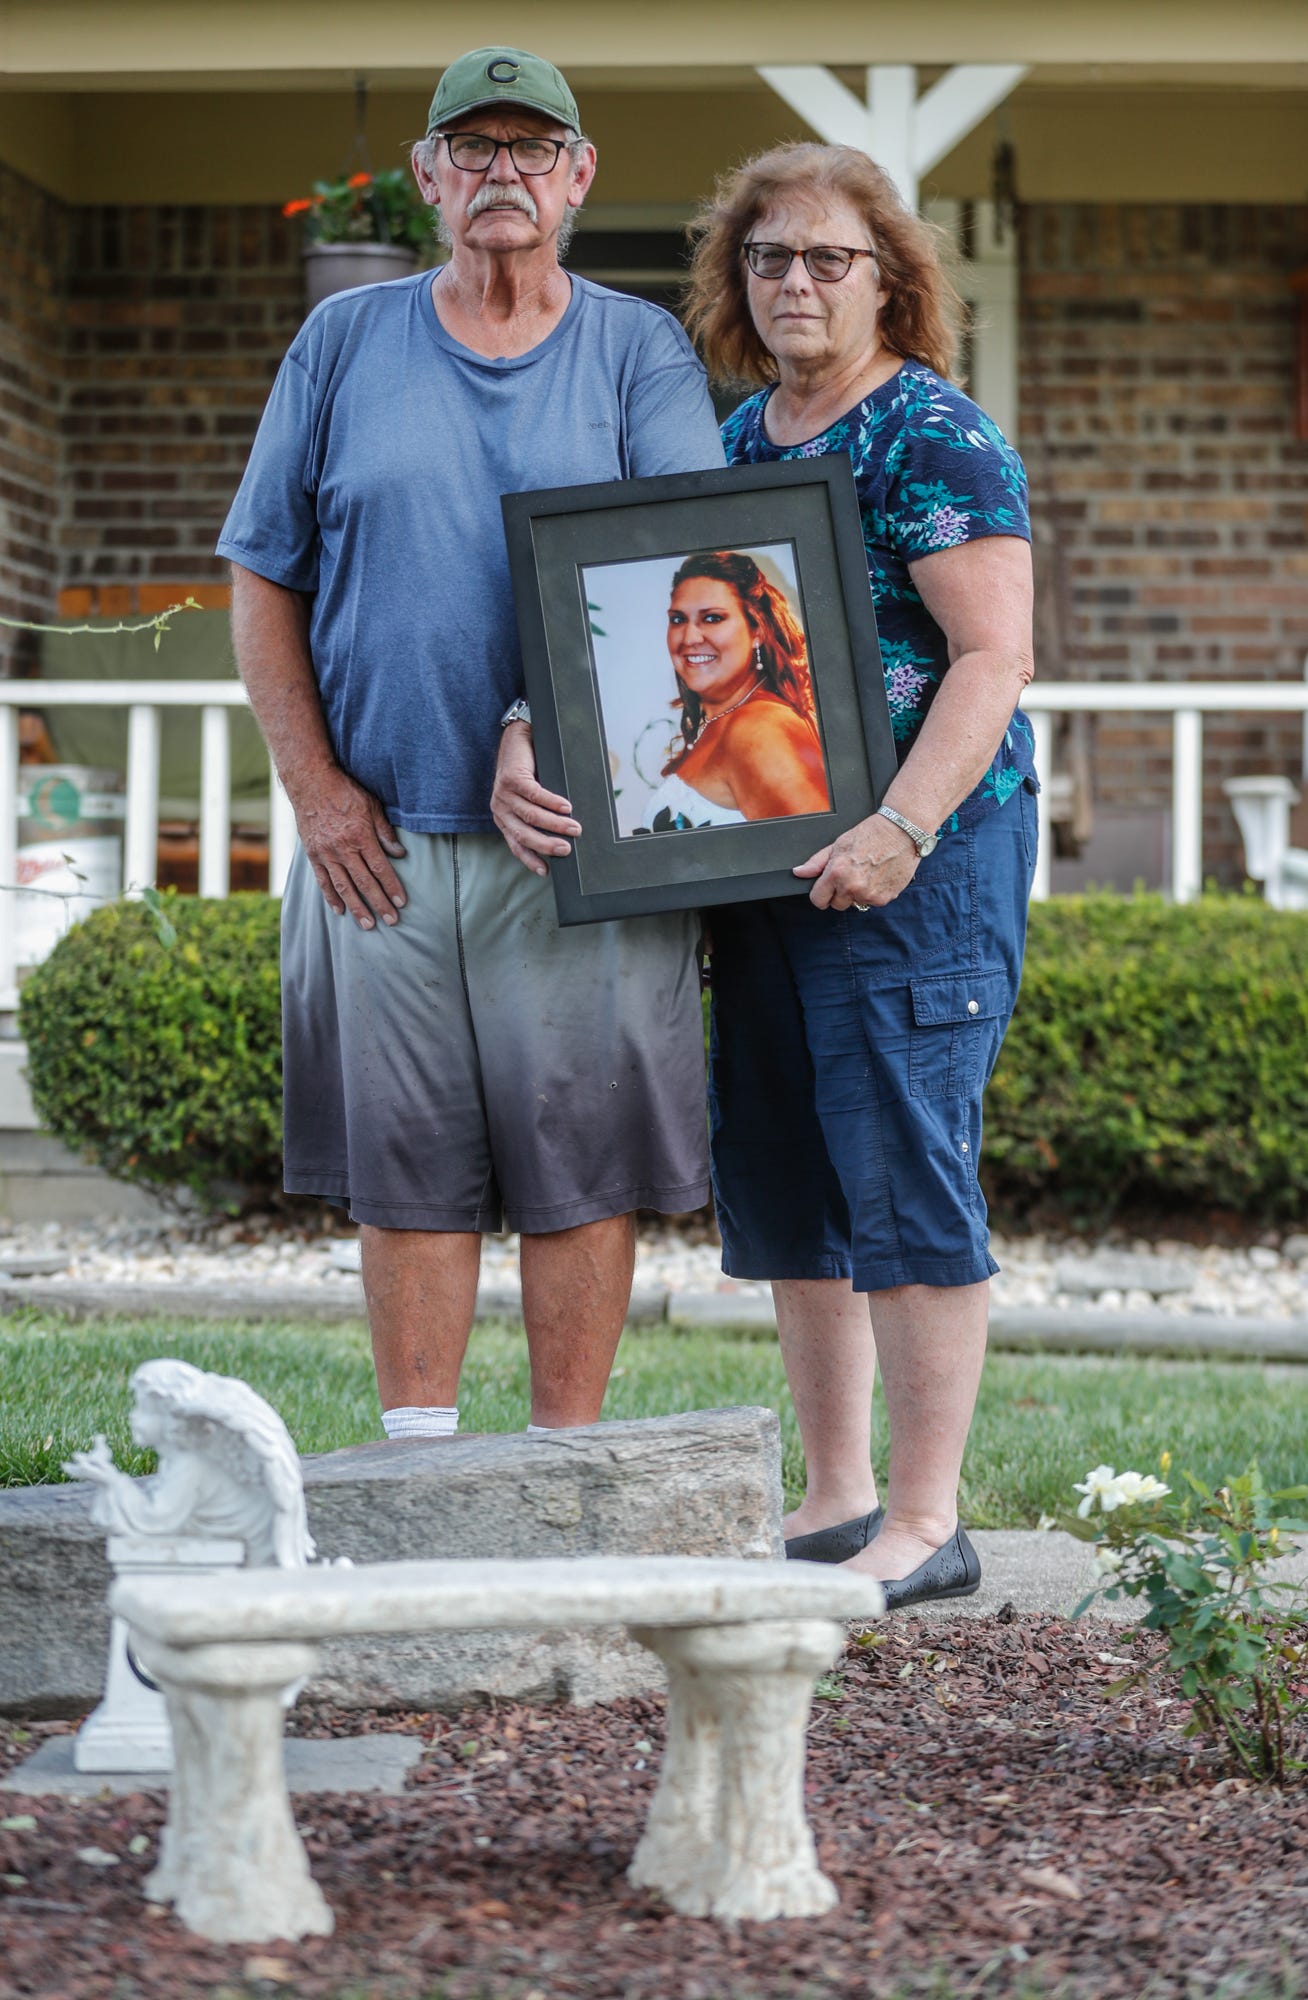 Thomas and Brenda Limbach hold a photo of their late daughter, Jill Phipps, on Tuesday, Sept. 14, 2021. The photograph of Phipps was taken on her wedding day. According to police, Phipps was shot and killed by her husband.